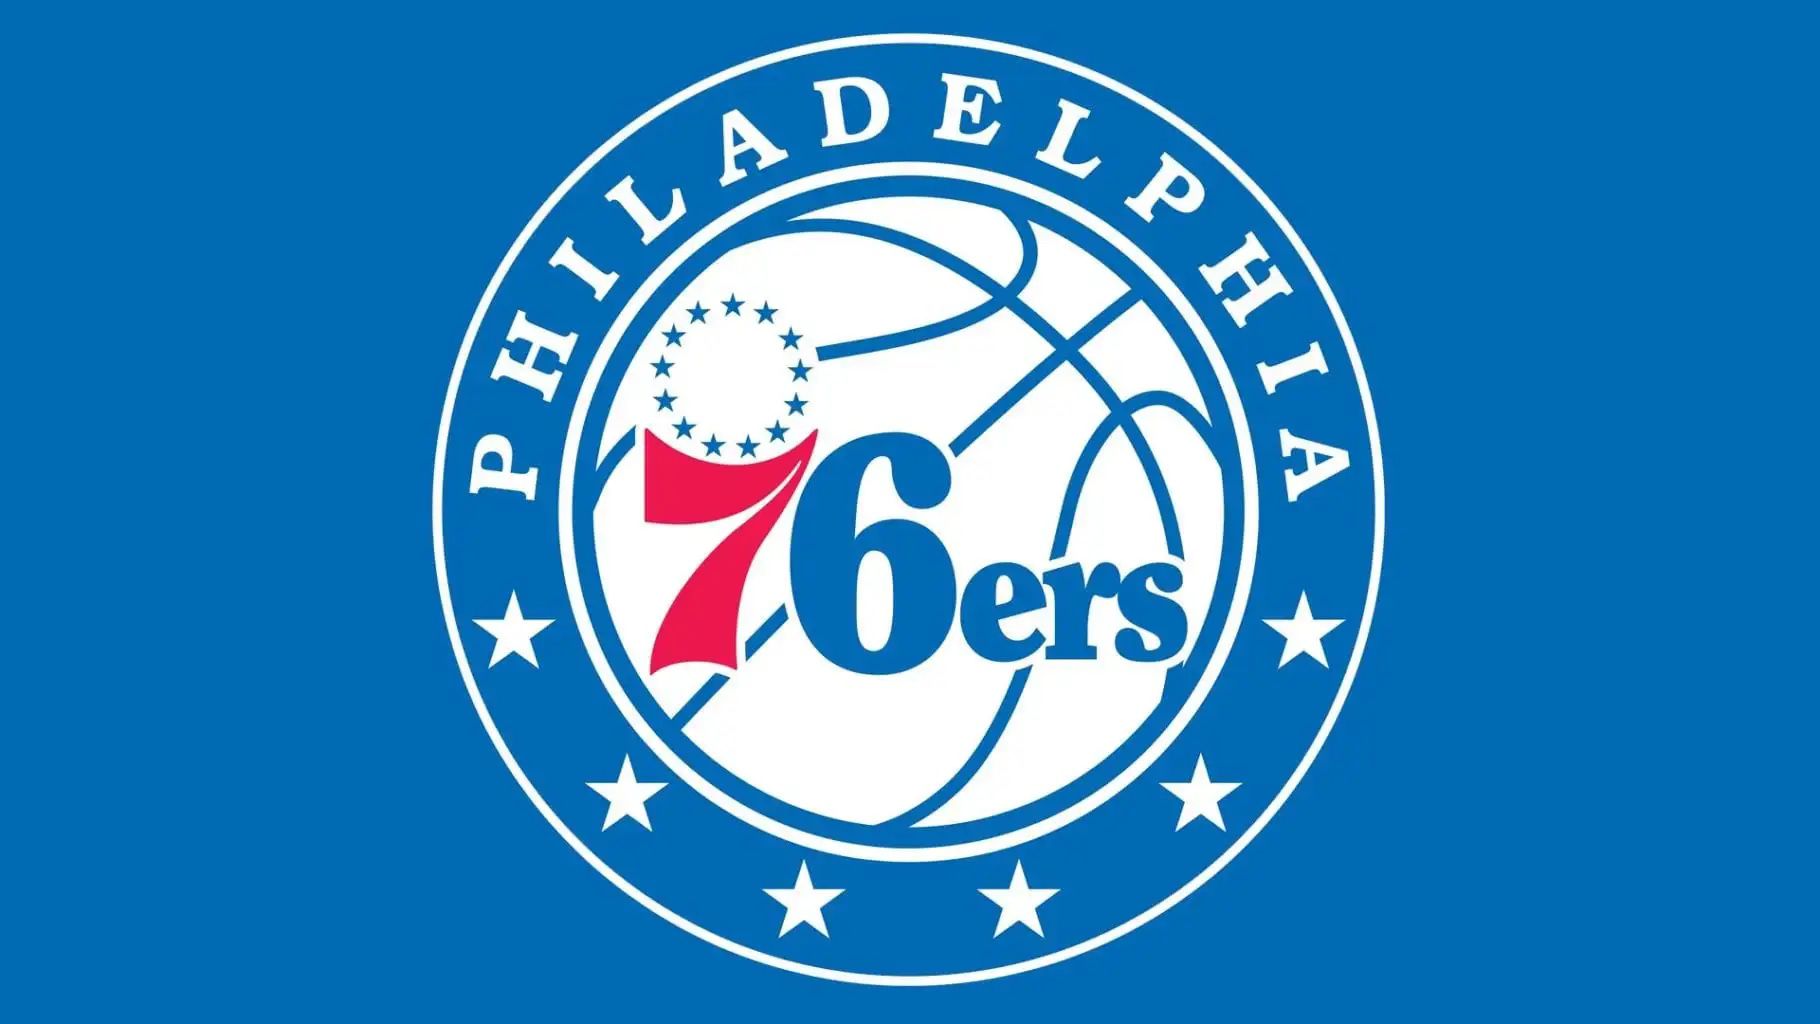 Sixers Preseason Game Vs Brooklyn 60 For Two ticket Section 120 Row 17 